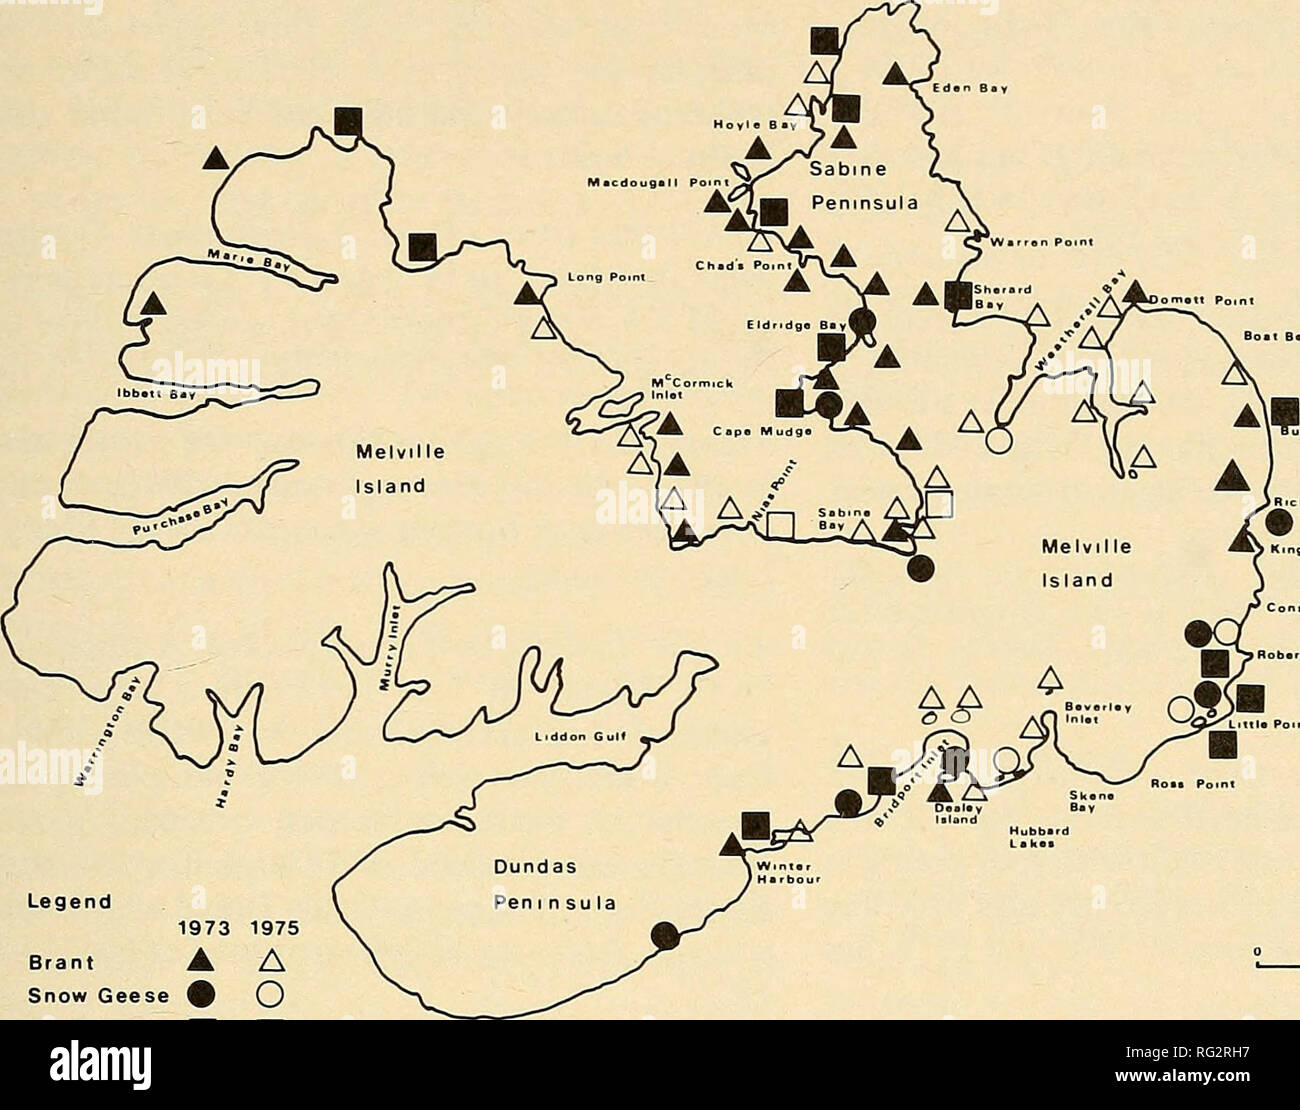 . The Canadian field-naturalist. 1978 Maltby: Birds of Melville Island, N.W.T. 27. Legend 1973 1975 Brant A A Snow Geese ^ O K.ng Elder   Q Figure 2. Locations of broods of Brant, Snow Geese, and King Eiders sighted on Melville Island in 1973 and 1975. in Yukon and western Mackenzie, southern Keewatin and southward. One pair at Consett Head 12 July 1974; first record for Melville Island. Rough-legged Hawk (Buteo lagopus). One at Dundas Peninsula 10 July 1973; one at Bailey Point 26 June and 3 July 1974; both were dark-phase birds. None seen in 1975. Gyrfalcon {Falco rusticolus). One seen 6 km  Stock Photo